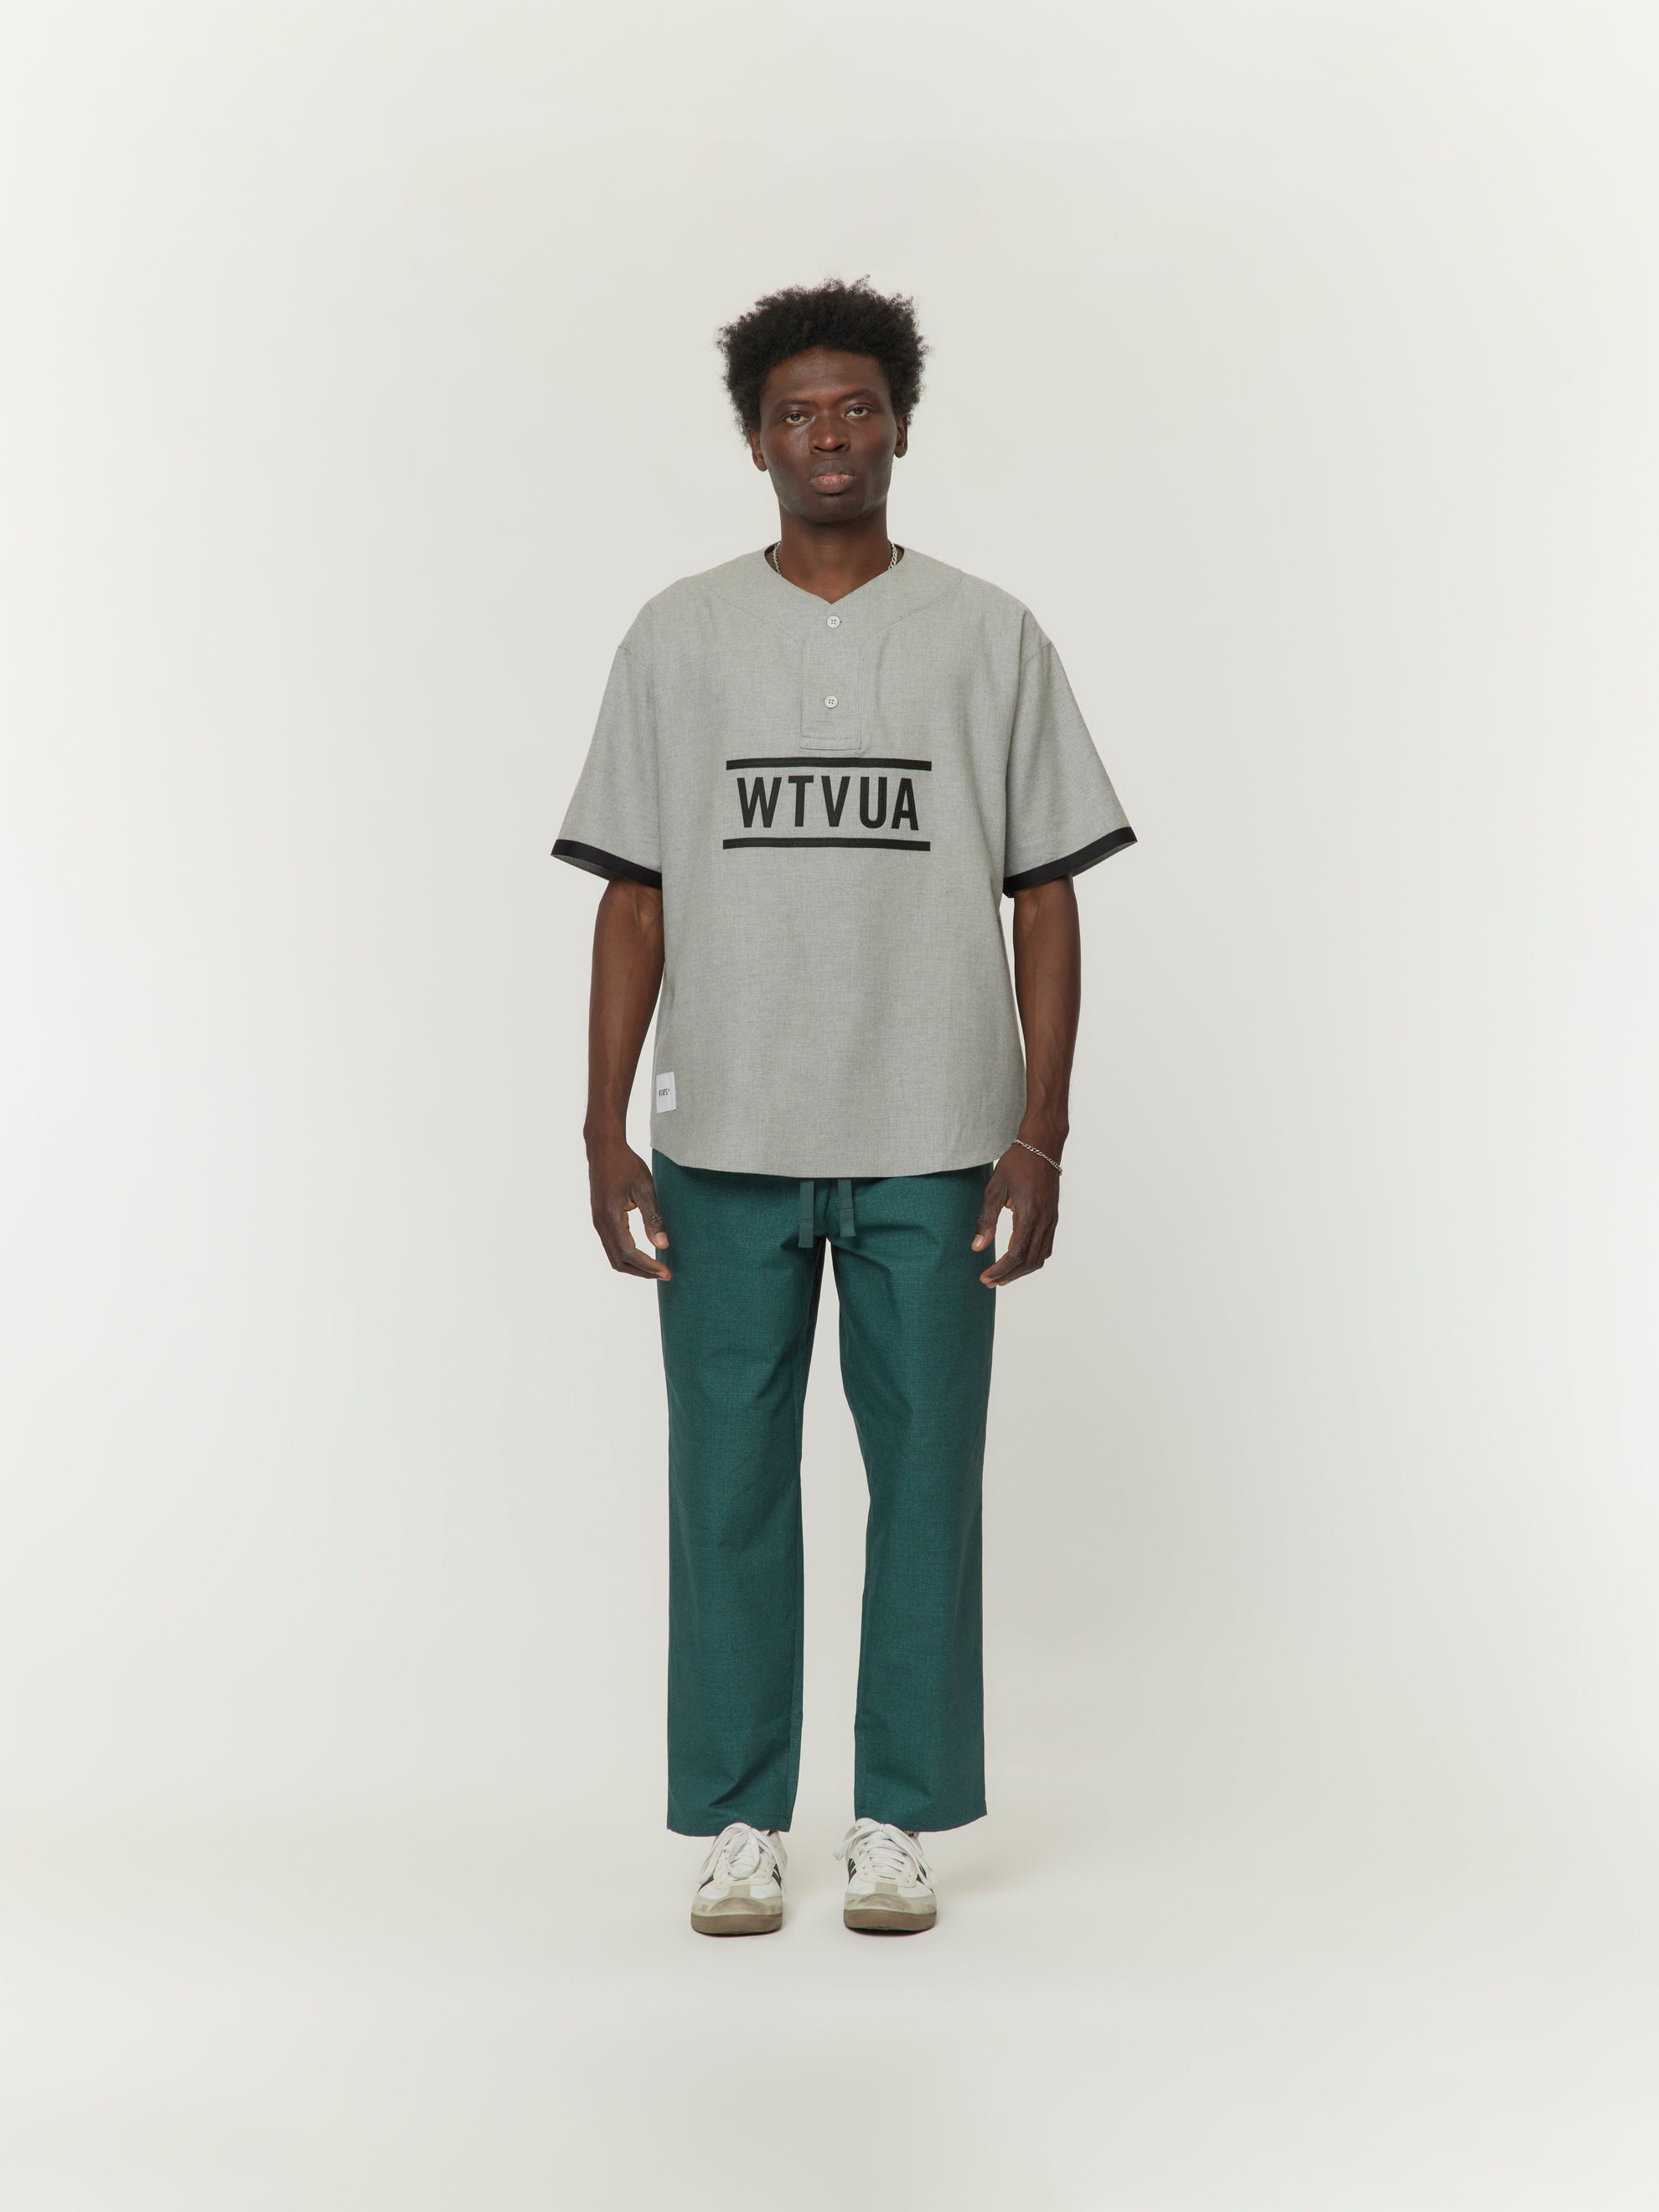 Buy Wtaps LEAGUE / SS / COTTON. TWILL. WTVUA Online at UNION LOS